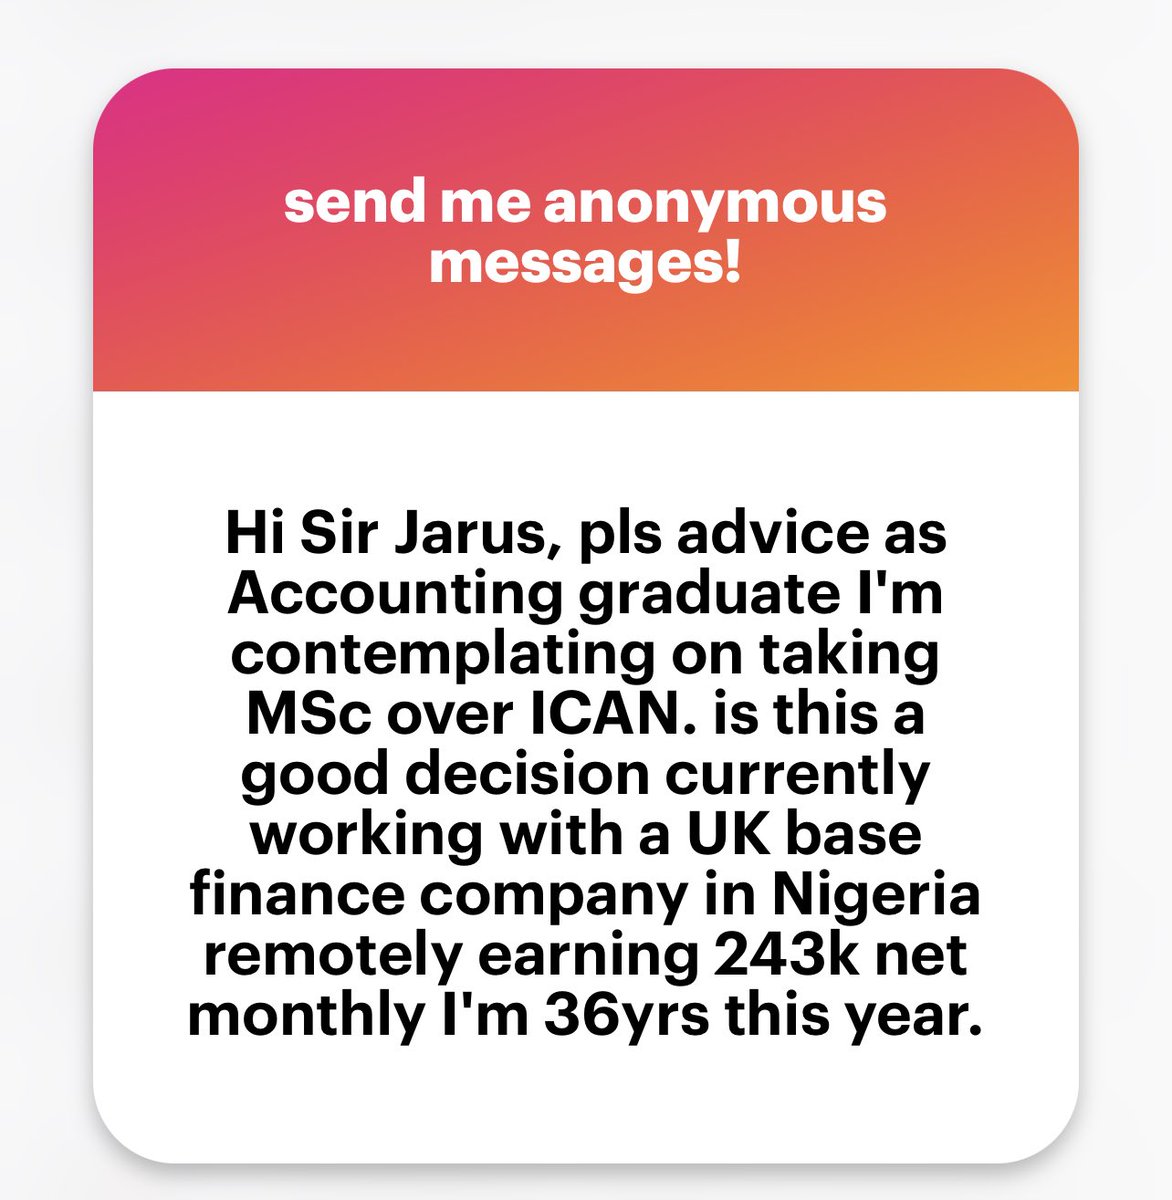 Depends on your goal (Msc if academics, Msc if doing things outside accounting and you may need 2nd degree). But if you are practising accounting, professional exams (ICAN, ACCA) trump Msc. Thankfully, both can be done together.